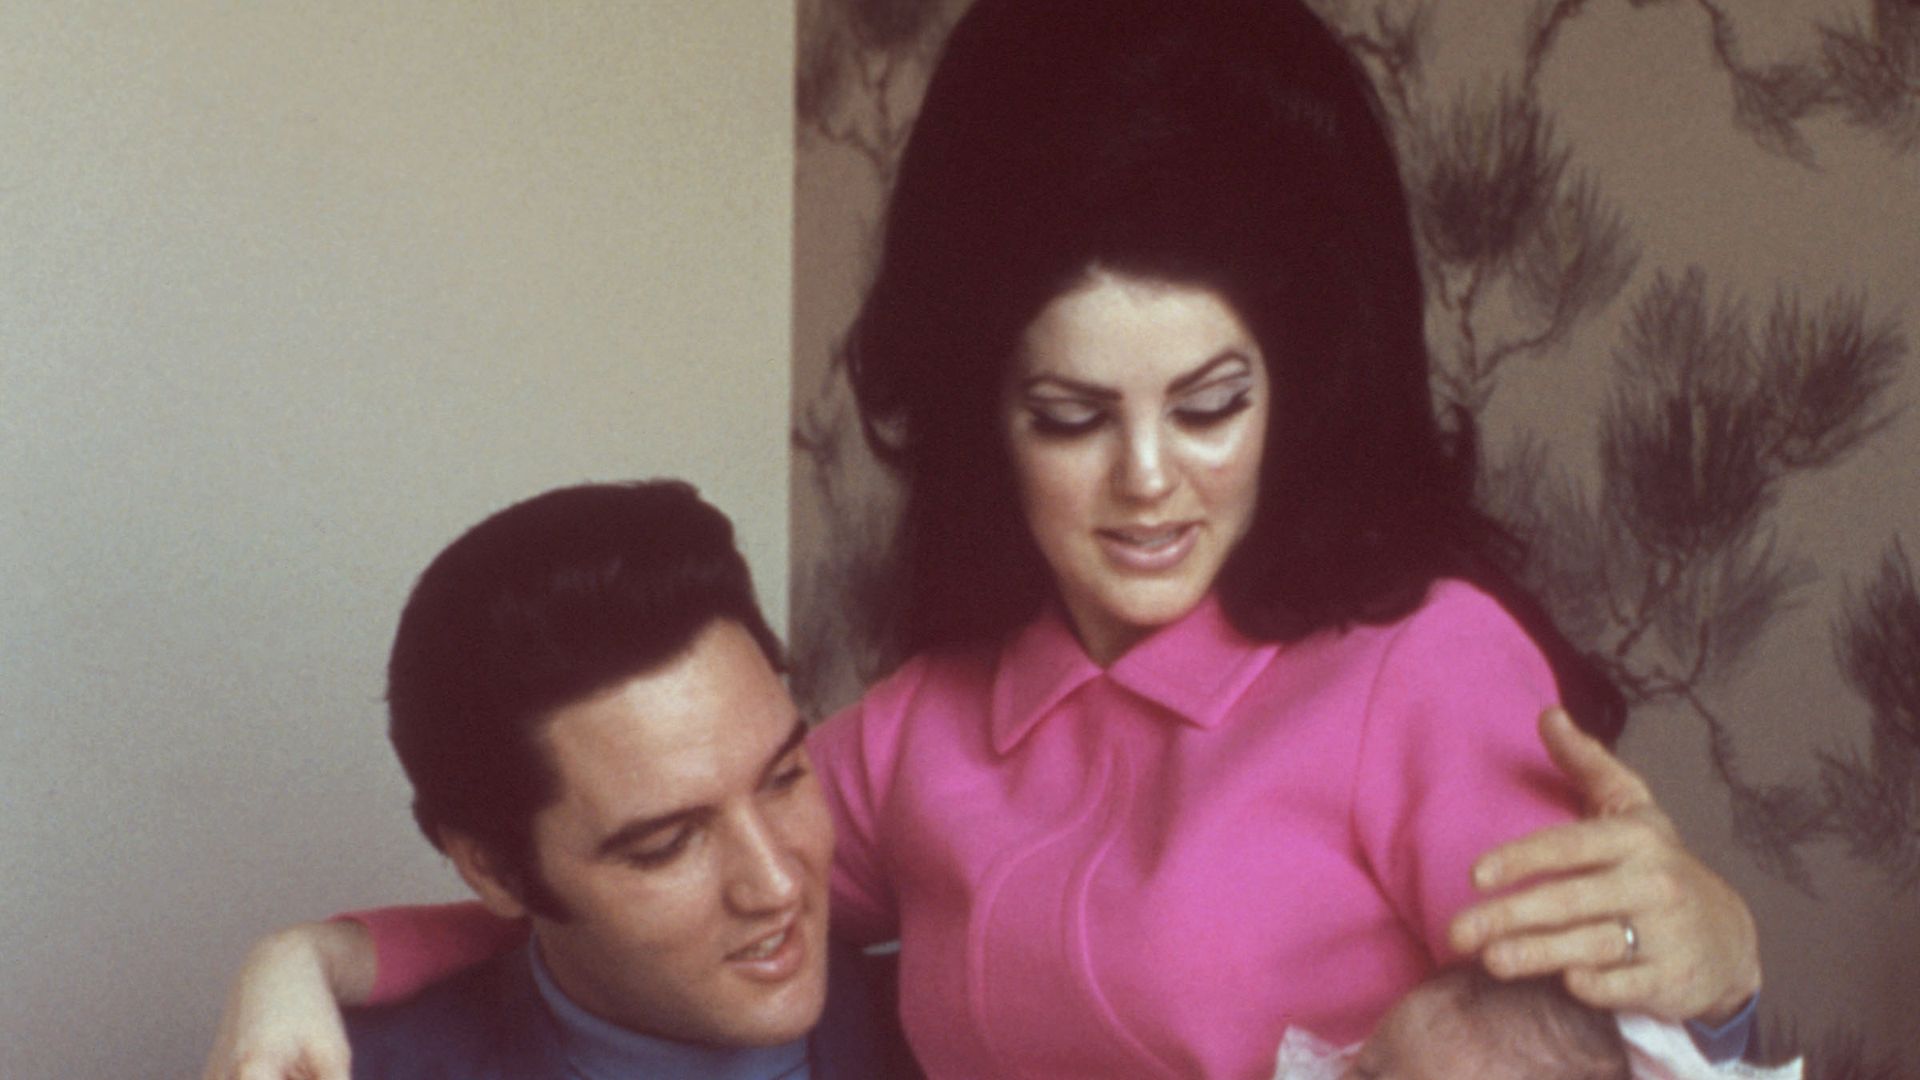 Priscilla Presley sparks reaction with rare intimate photos featuring Elvis Presley and Lisa Marie Presley